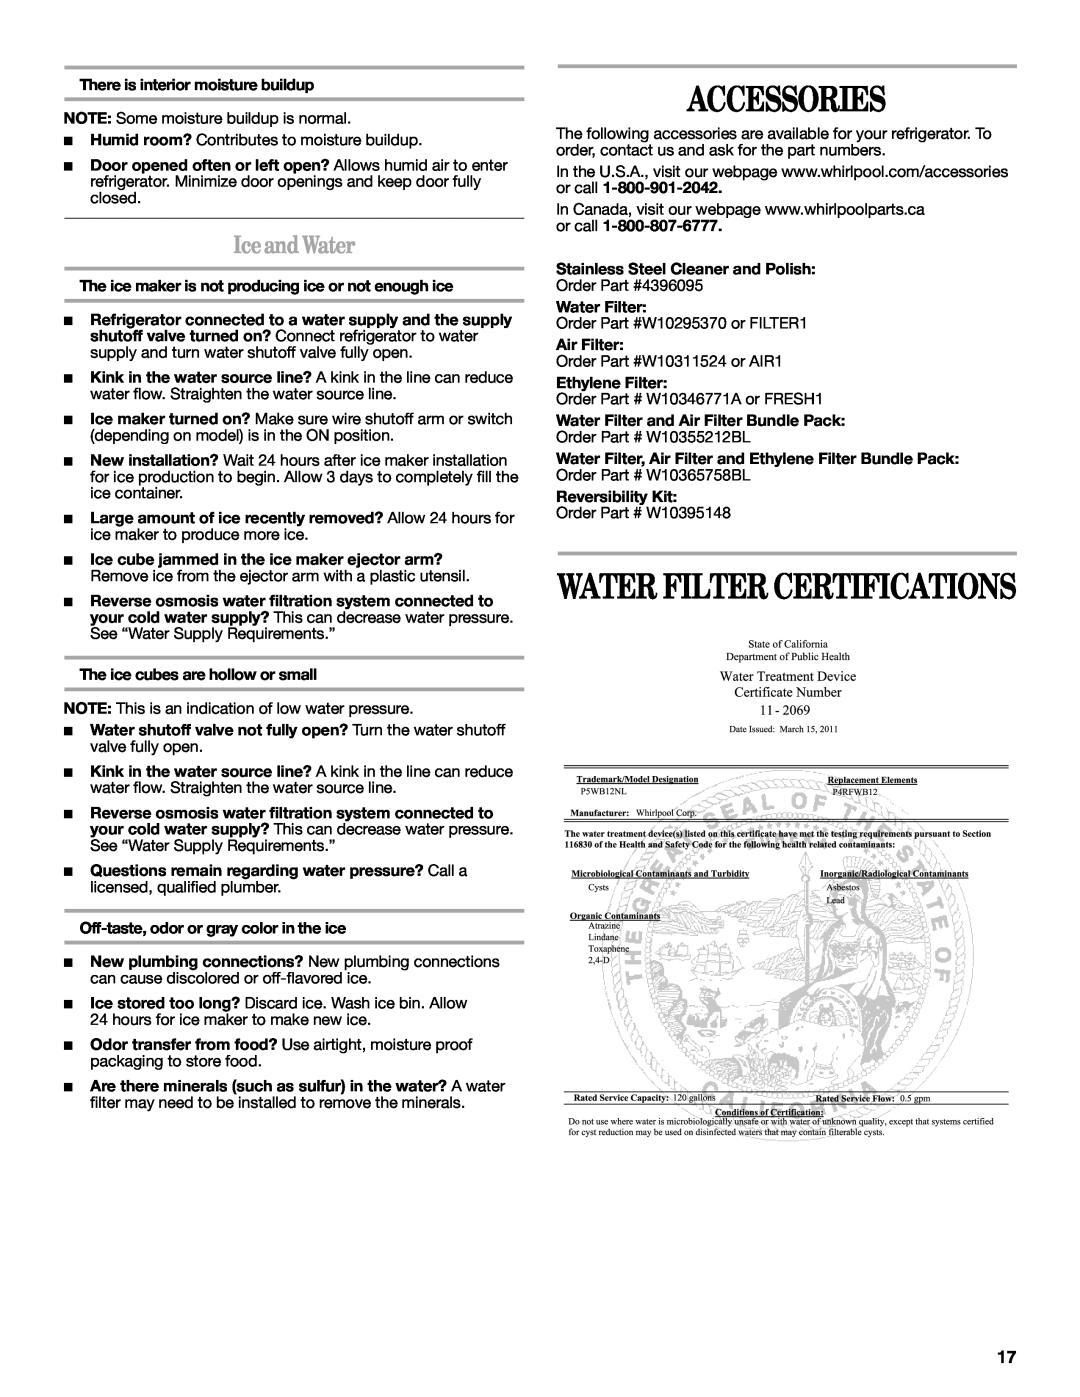 Whirlpool W10343810A Accessories, Iceand Water, Water Filter Certifications, There is interior moisture buildup 